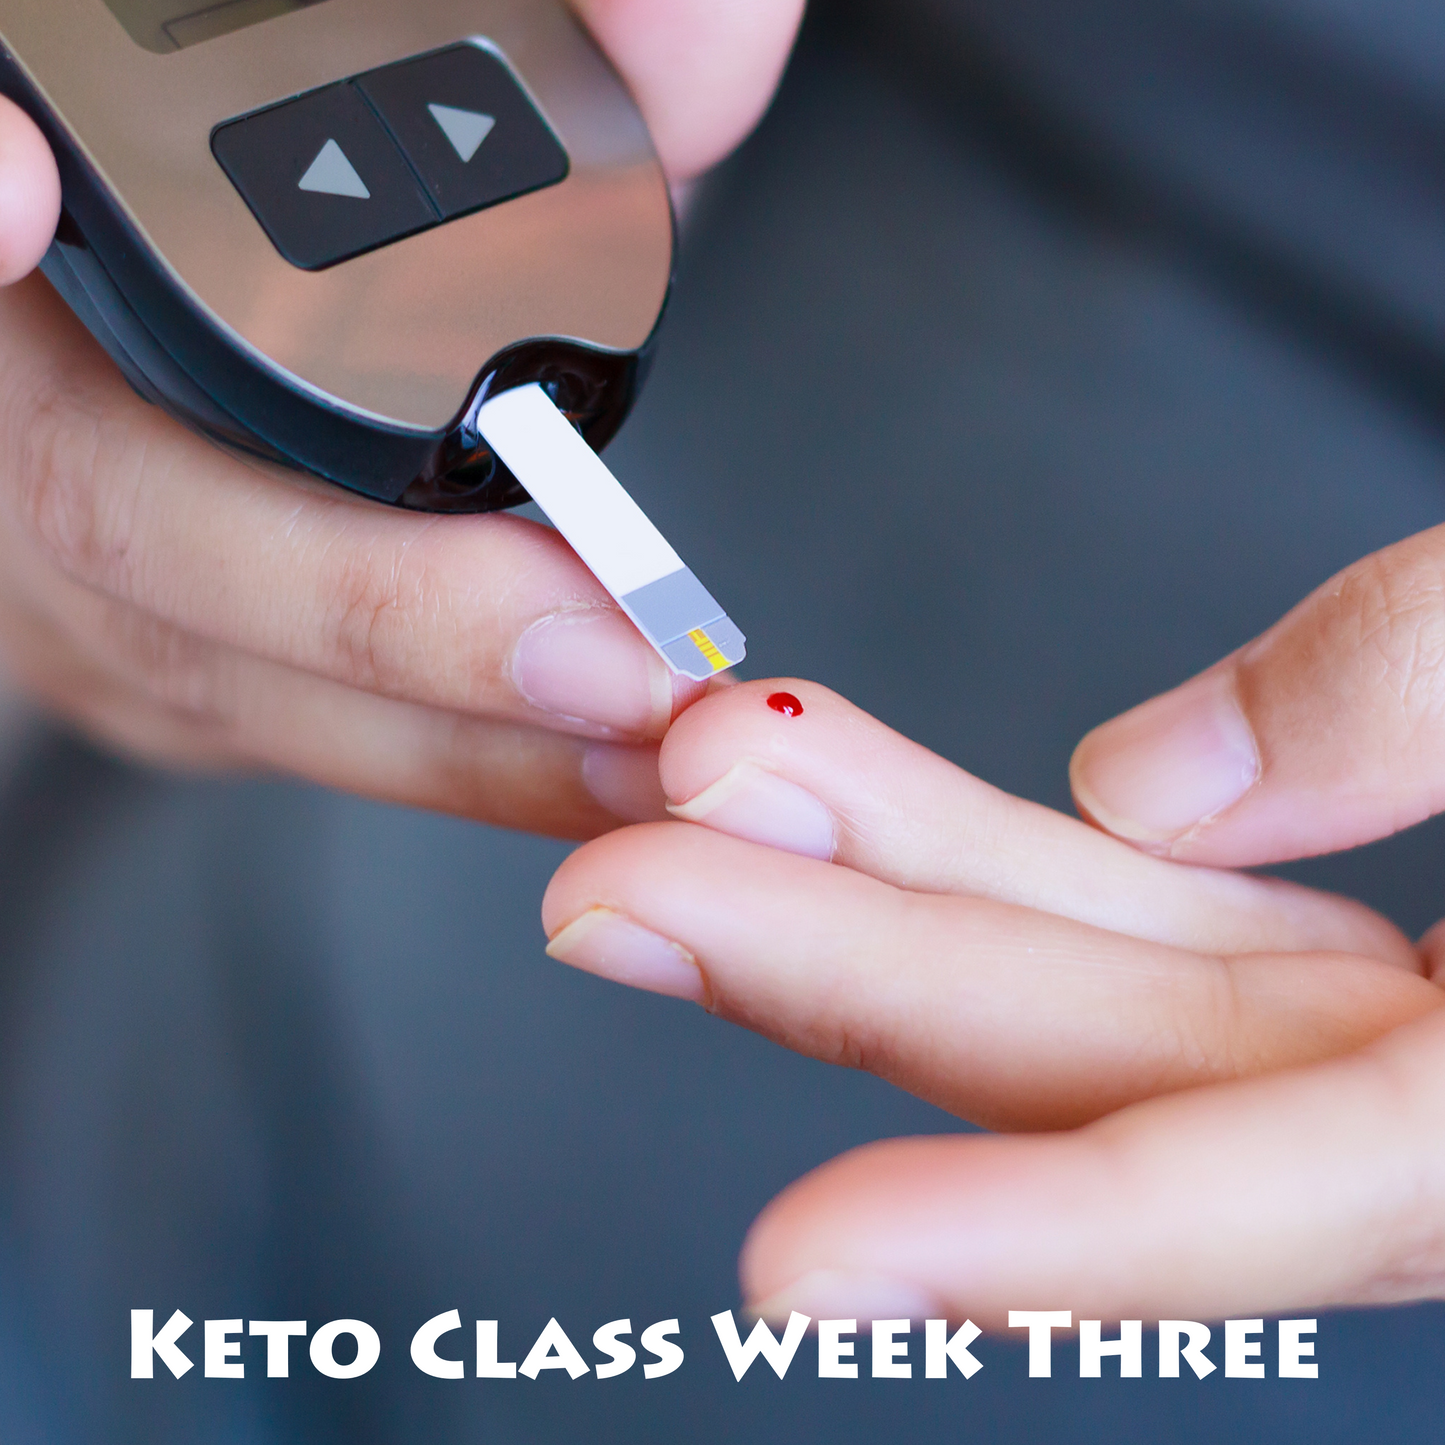 Keto Class Week 3—Ketosis:The right way of testing your ketones.